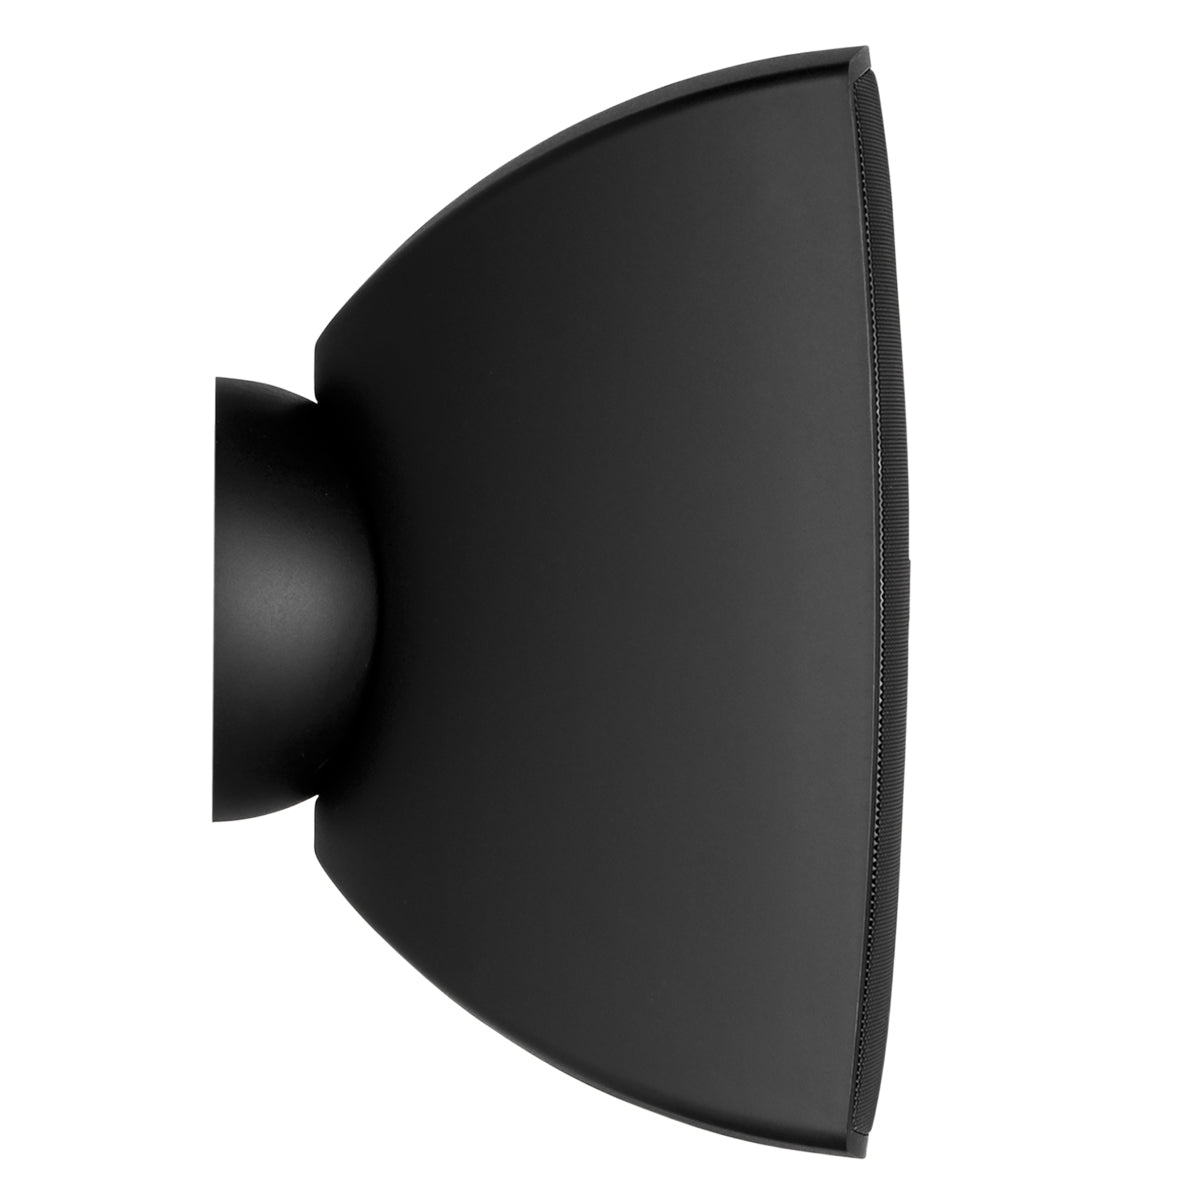 Audac ATEO4MK2 Wall speaker with CleverMount 4" Black version - 8ohm and 100V